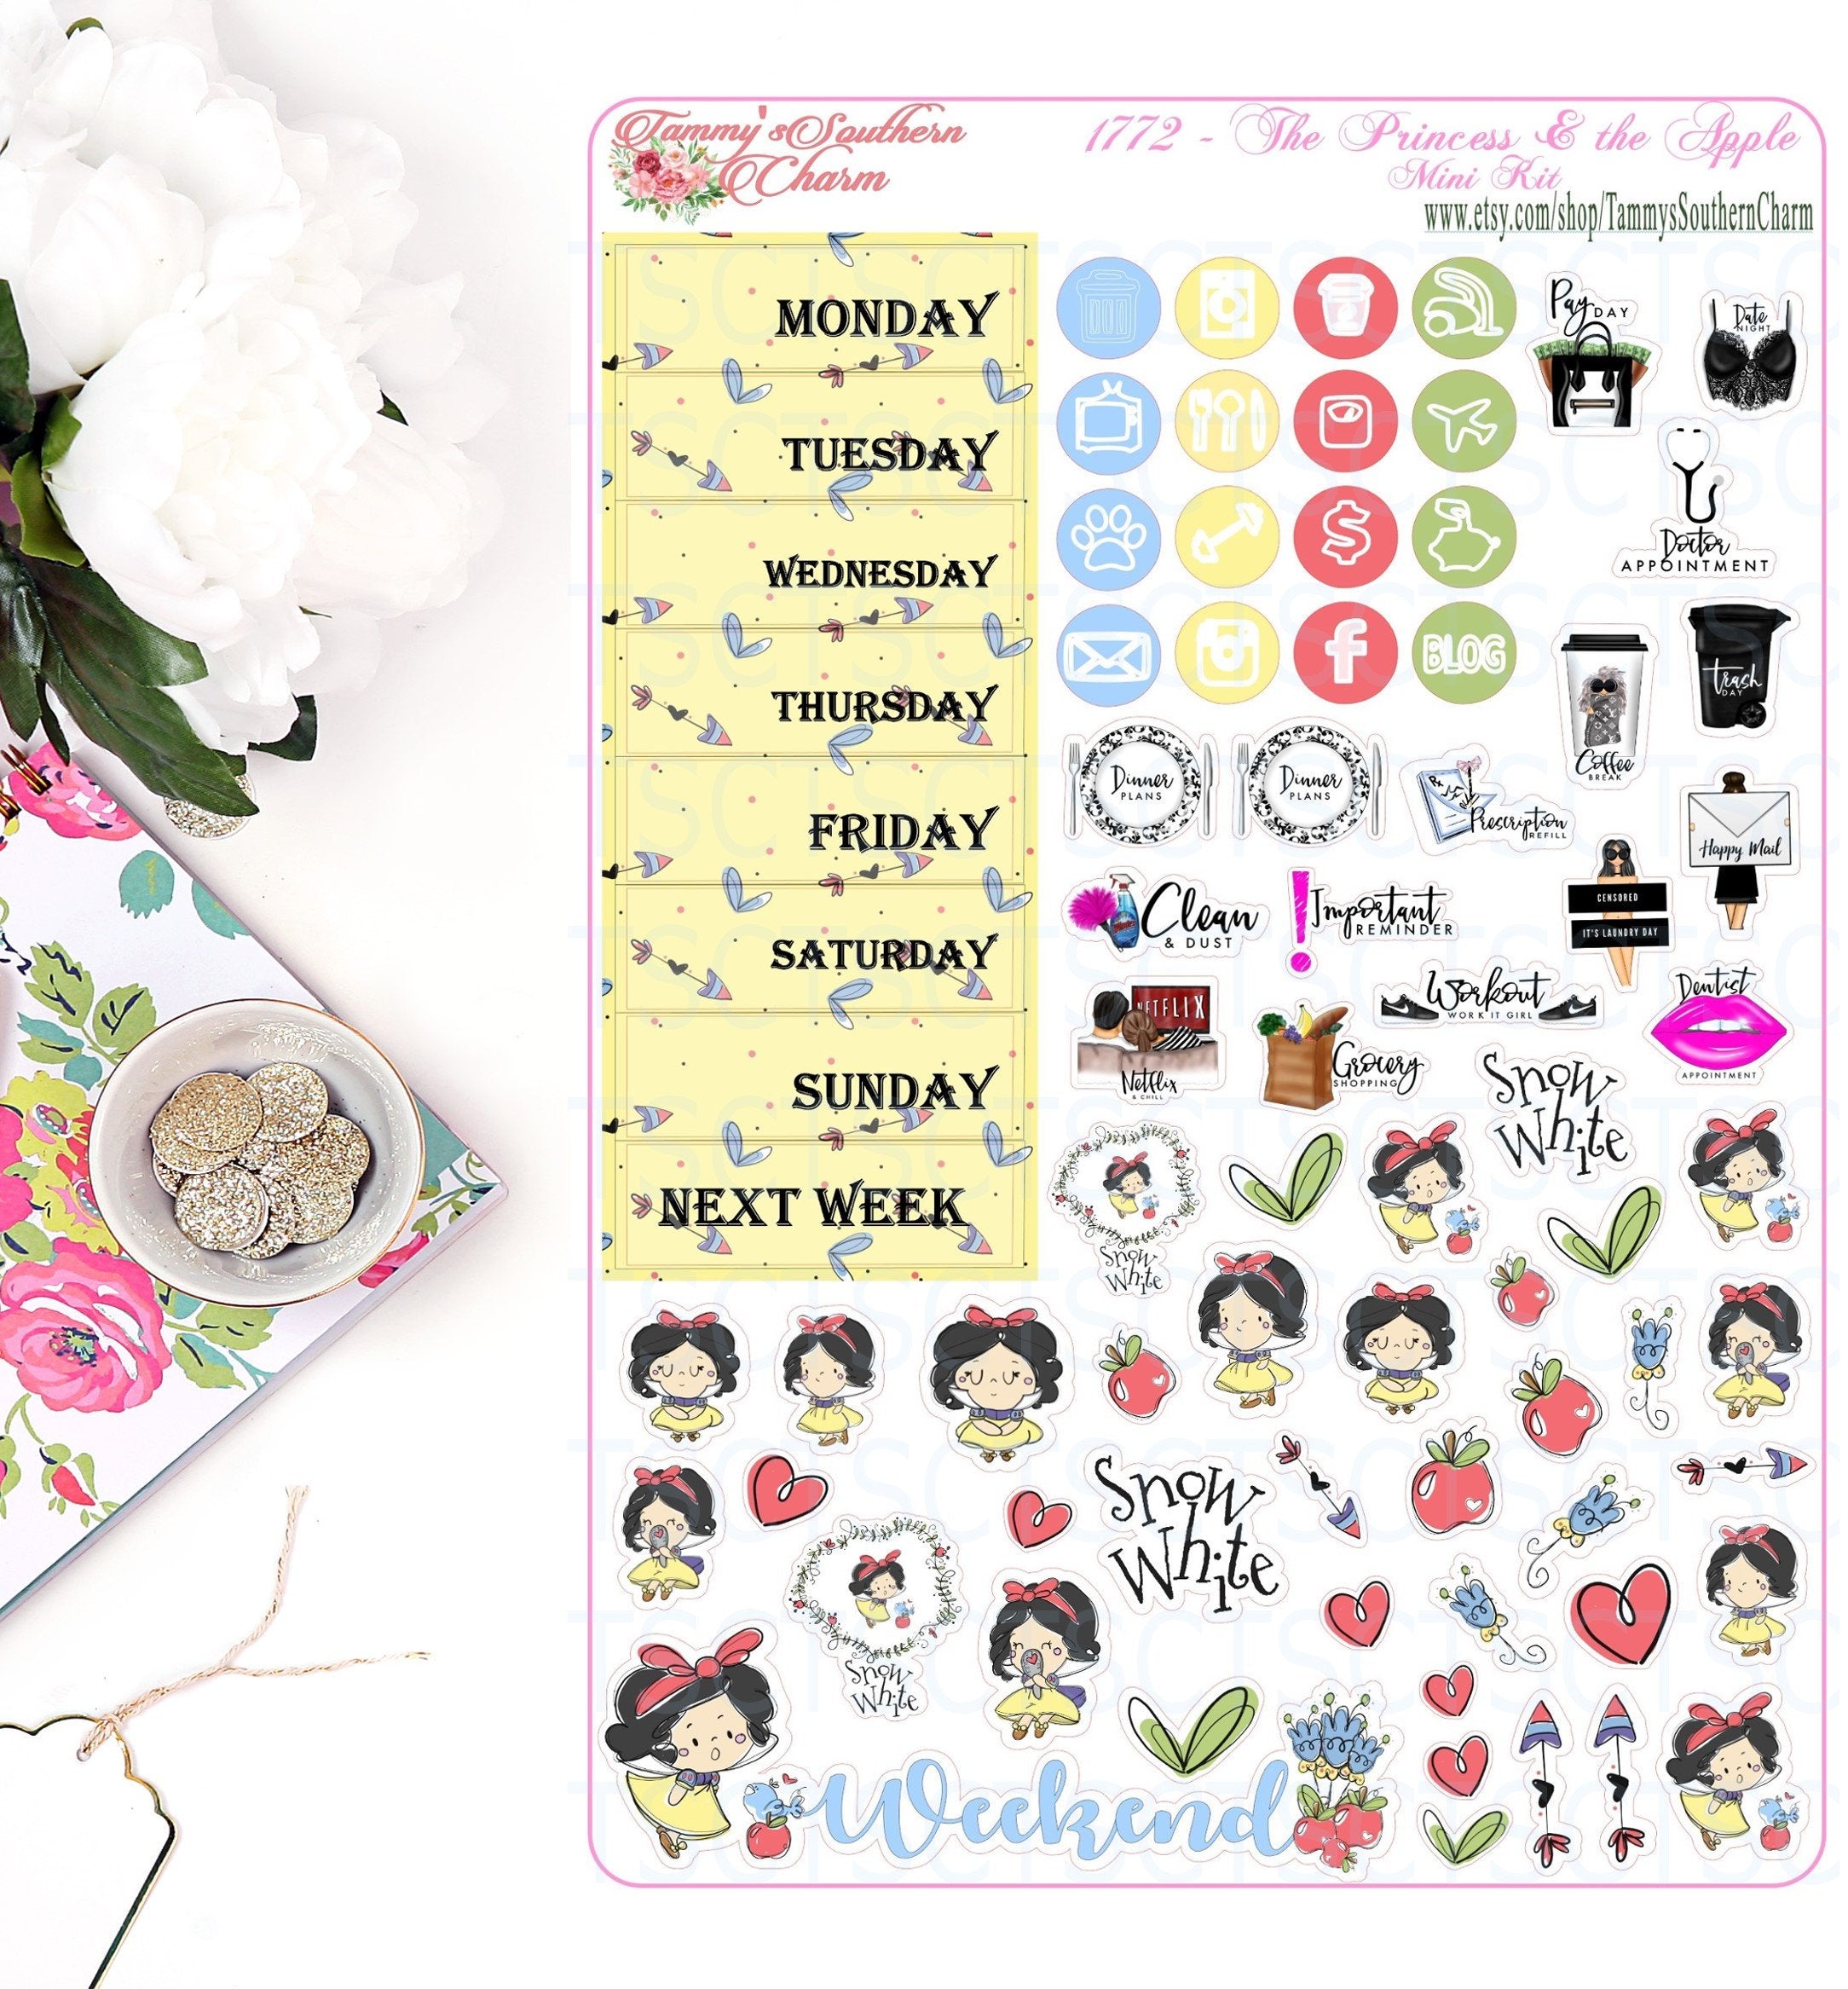 1772 PRINCESS & THE APPLE - Stickers, Planner Stickers, Traveler's nb stickers, Planner Layout, Princess Stickers, snow white inspired